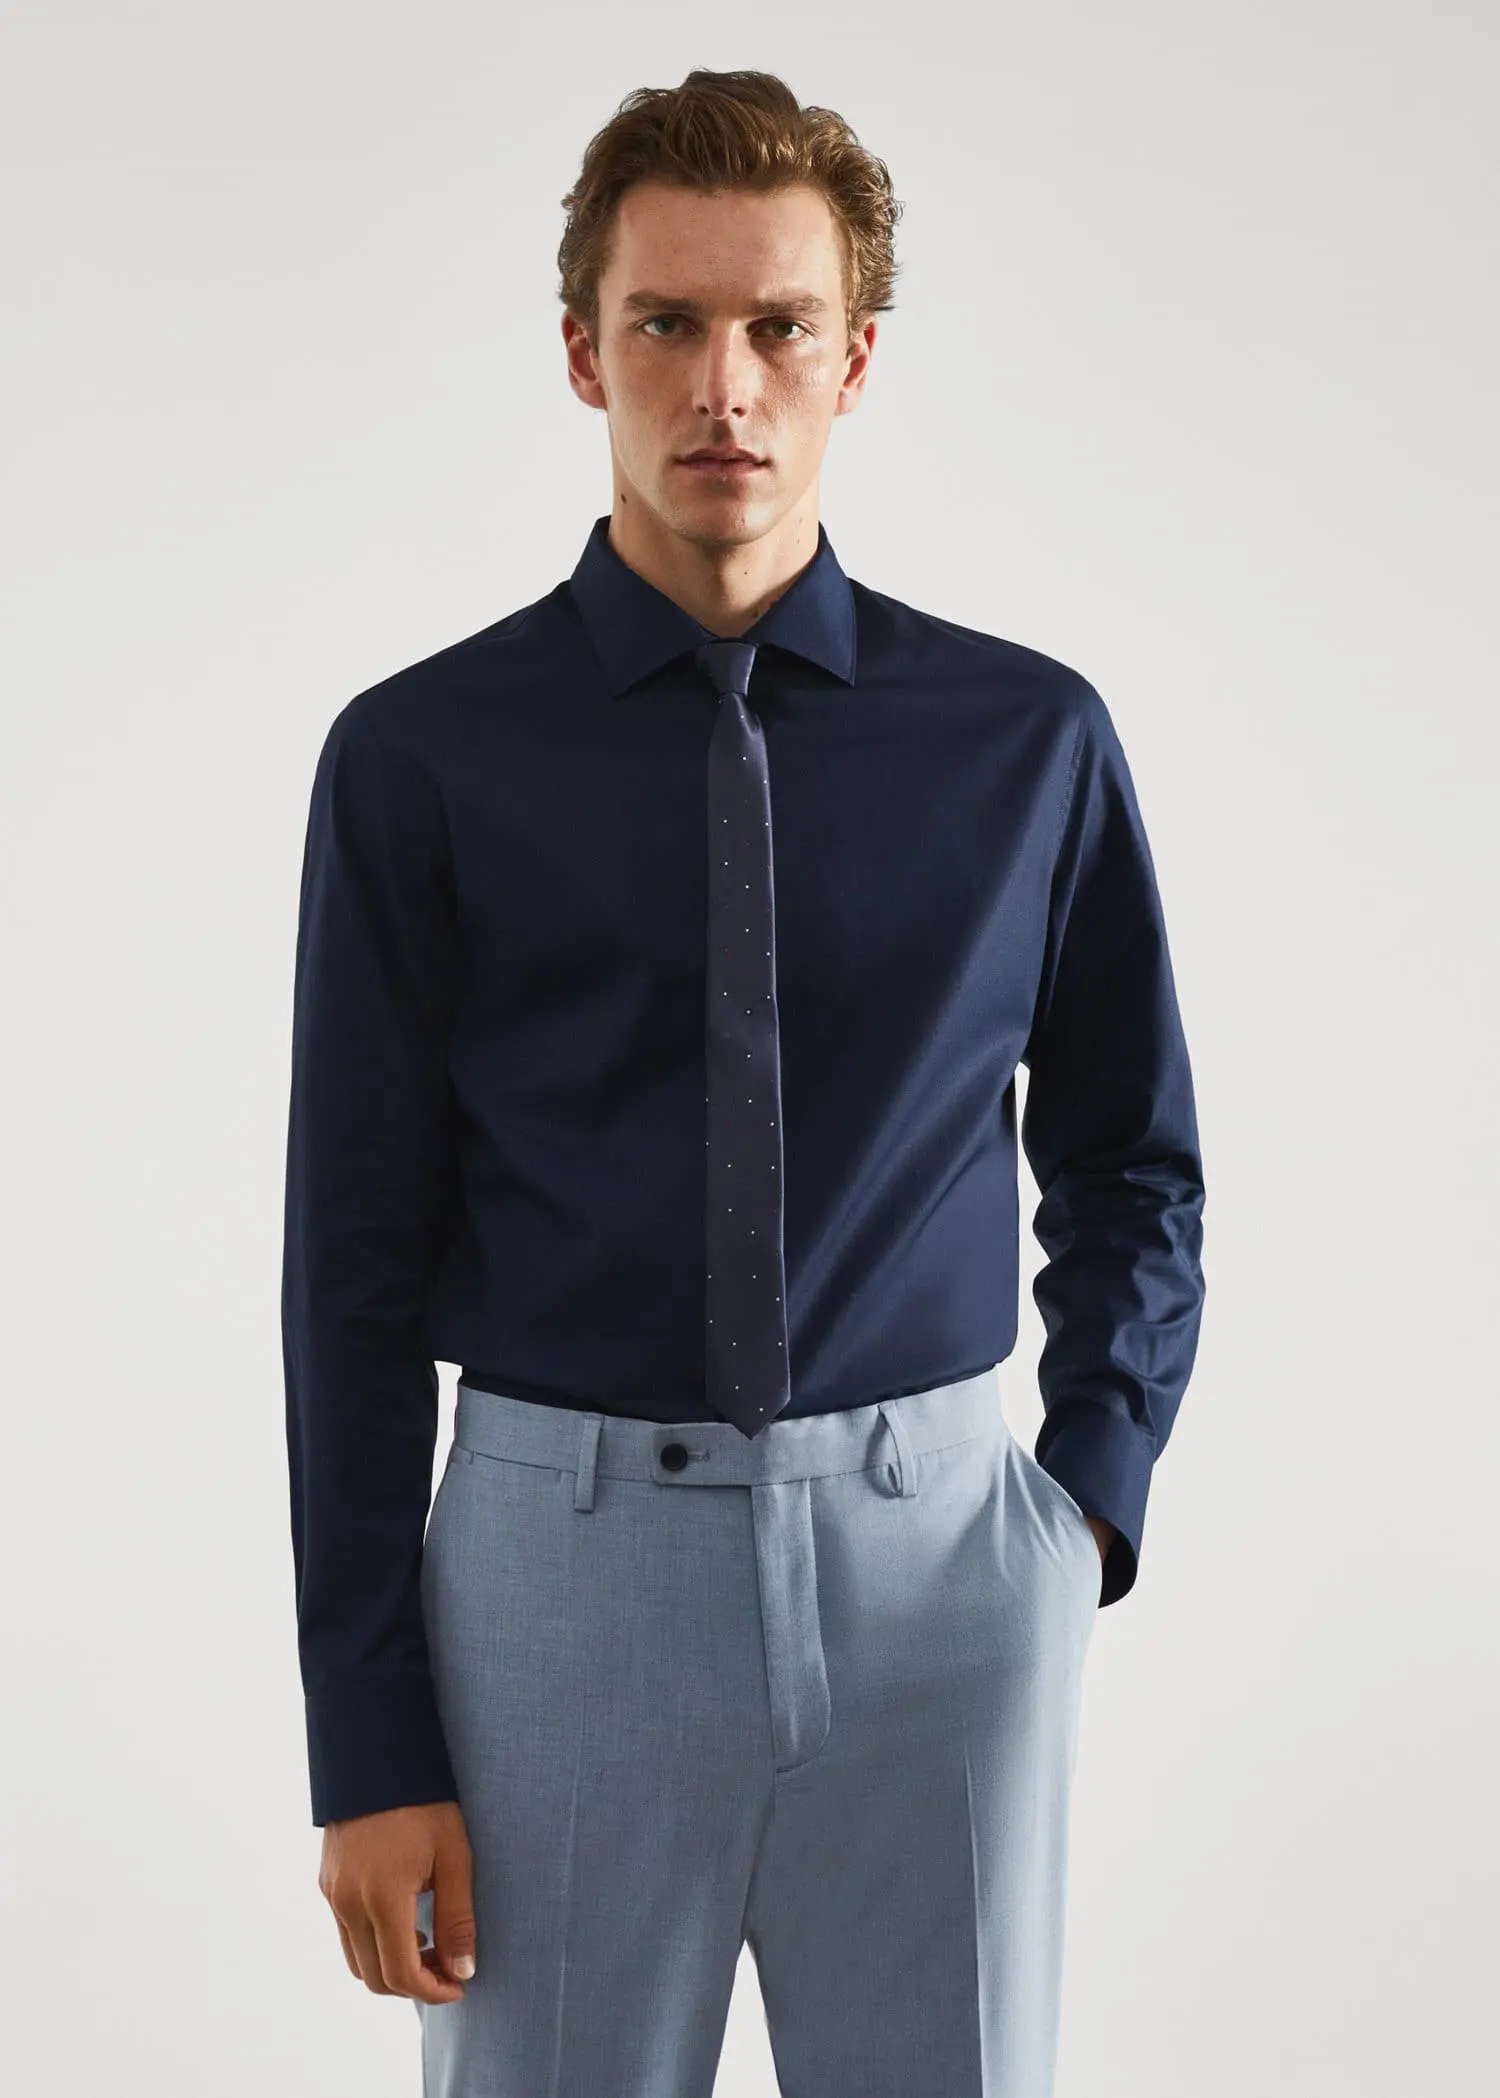 Mango Slim-fit cotton poplin suit shirt. a man in a suit and tie standing with his hands in his pockets. 